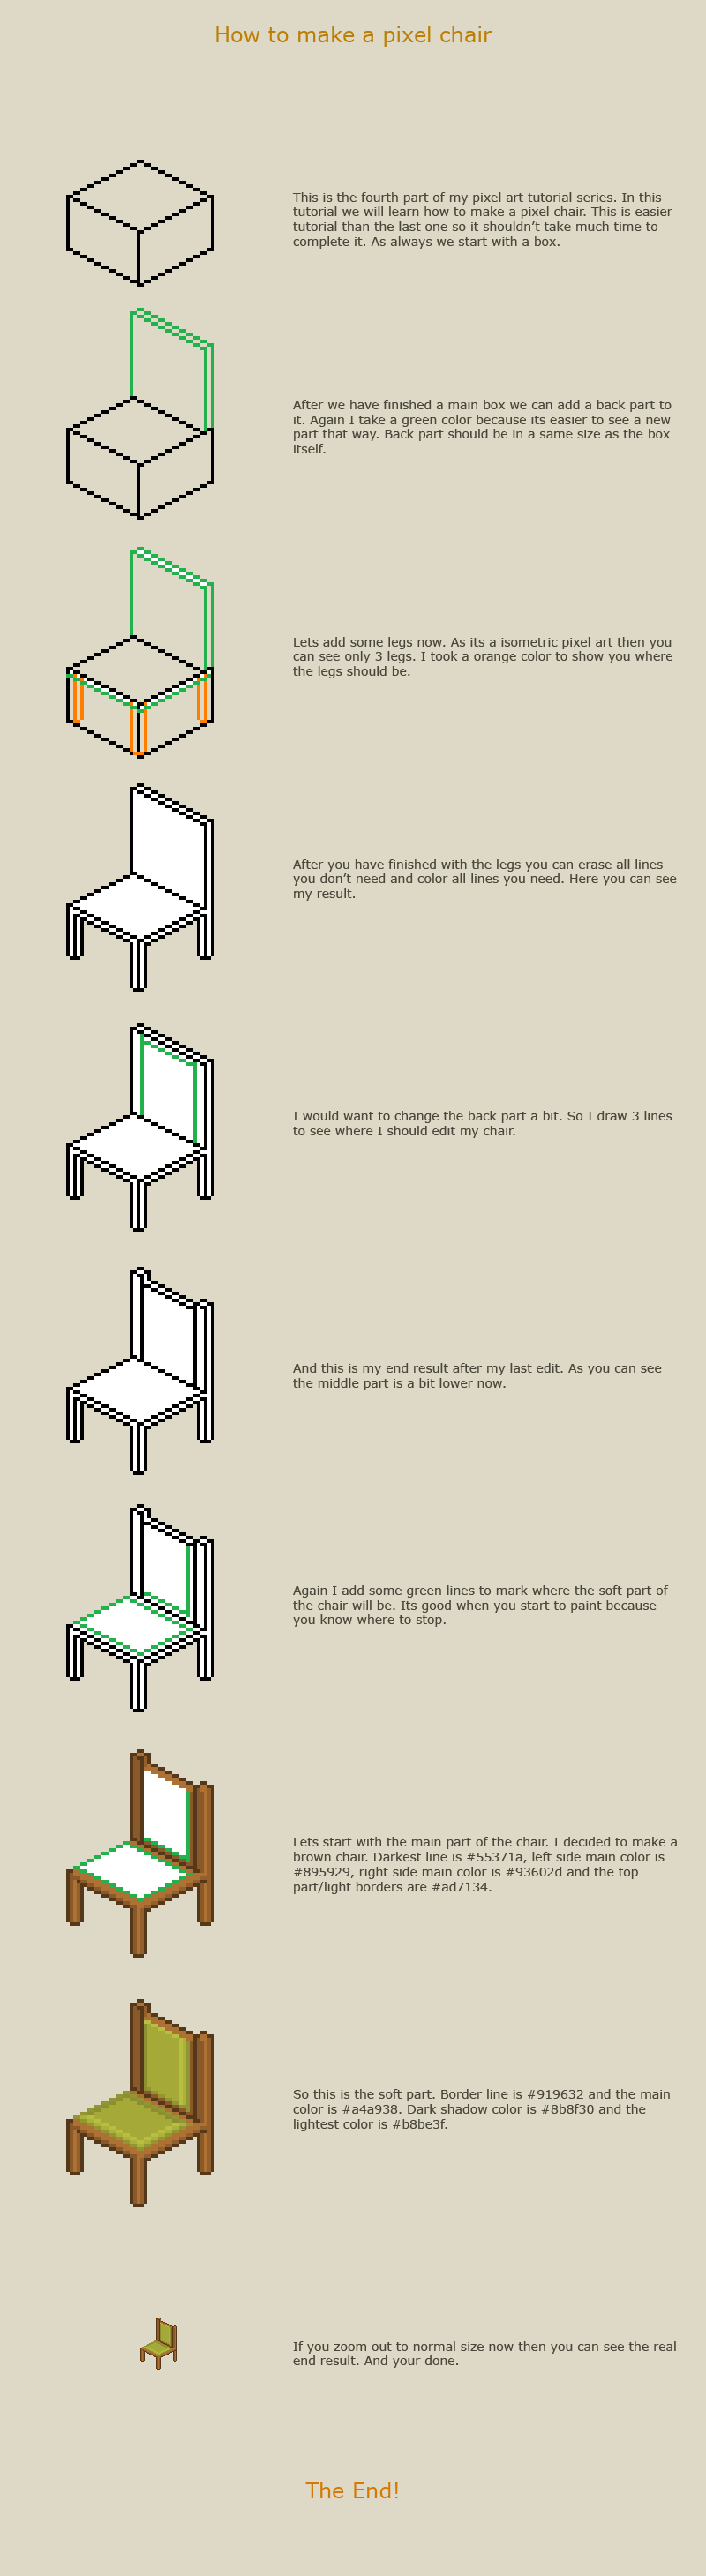 How to make a pixel chair